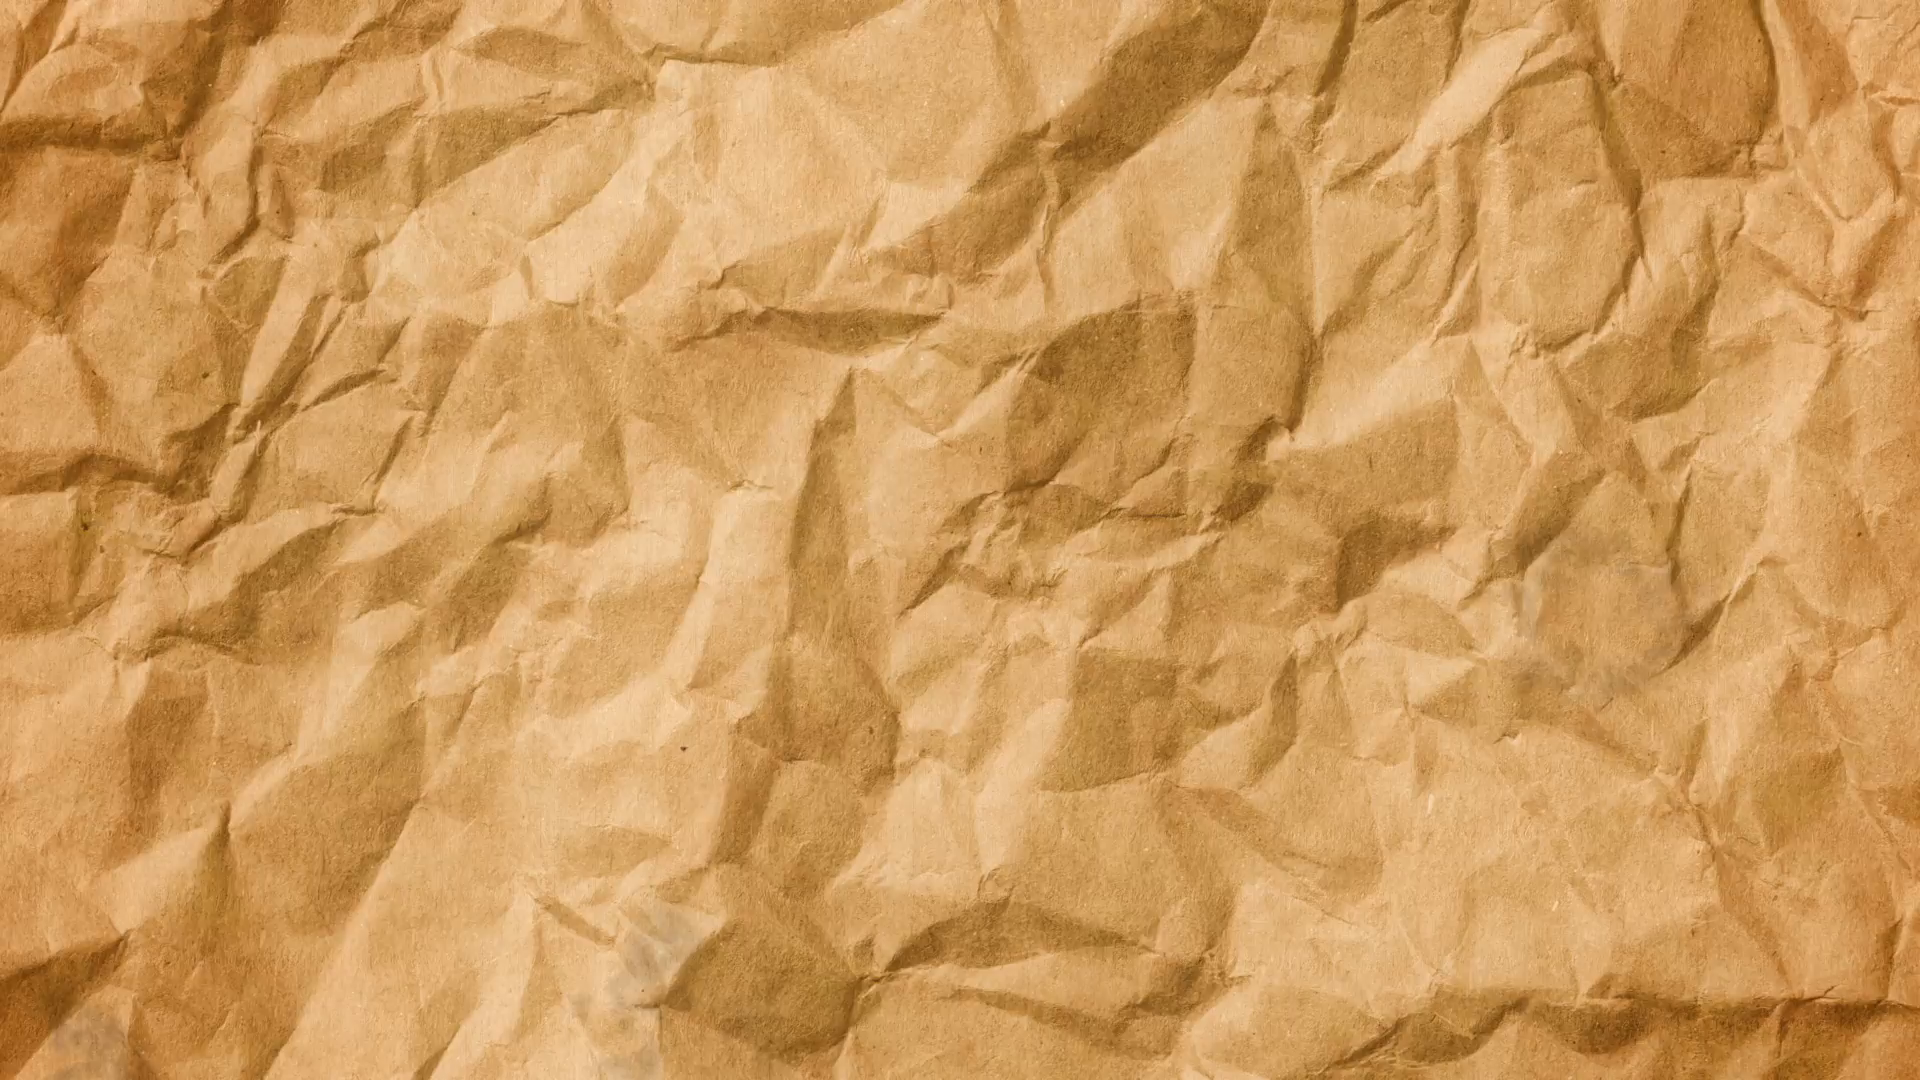 Animated paper texture as hd background with splotches, grain and ...